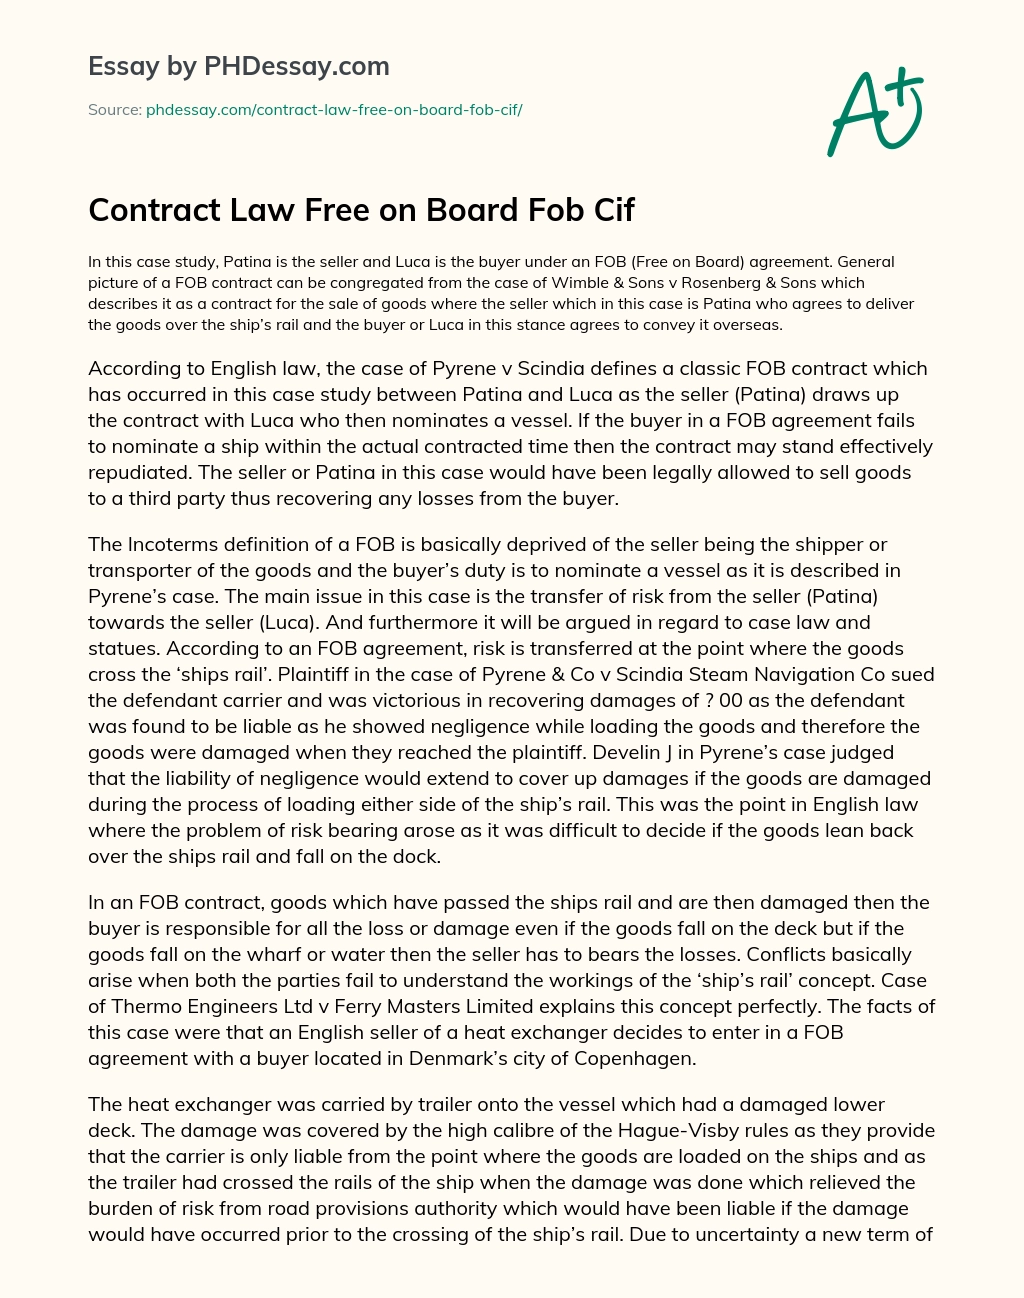 Contract Law Free on Board Fob Cif essay